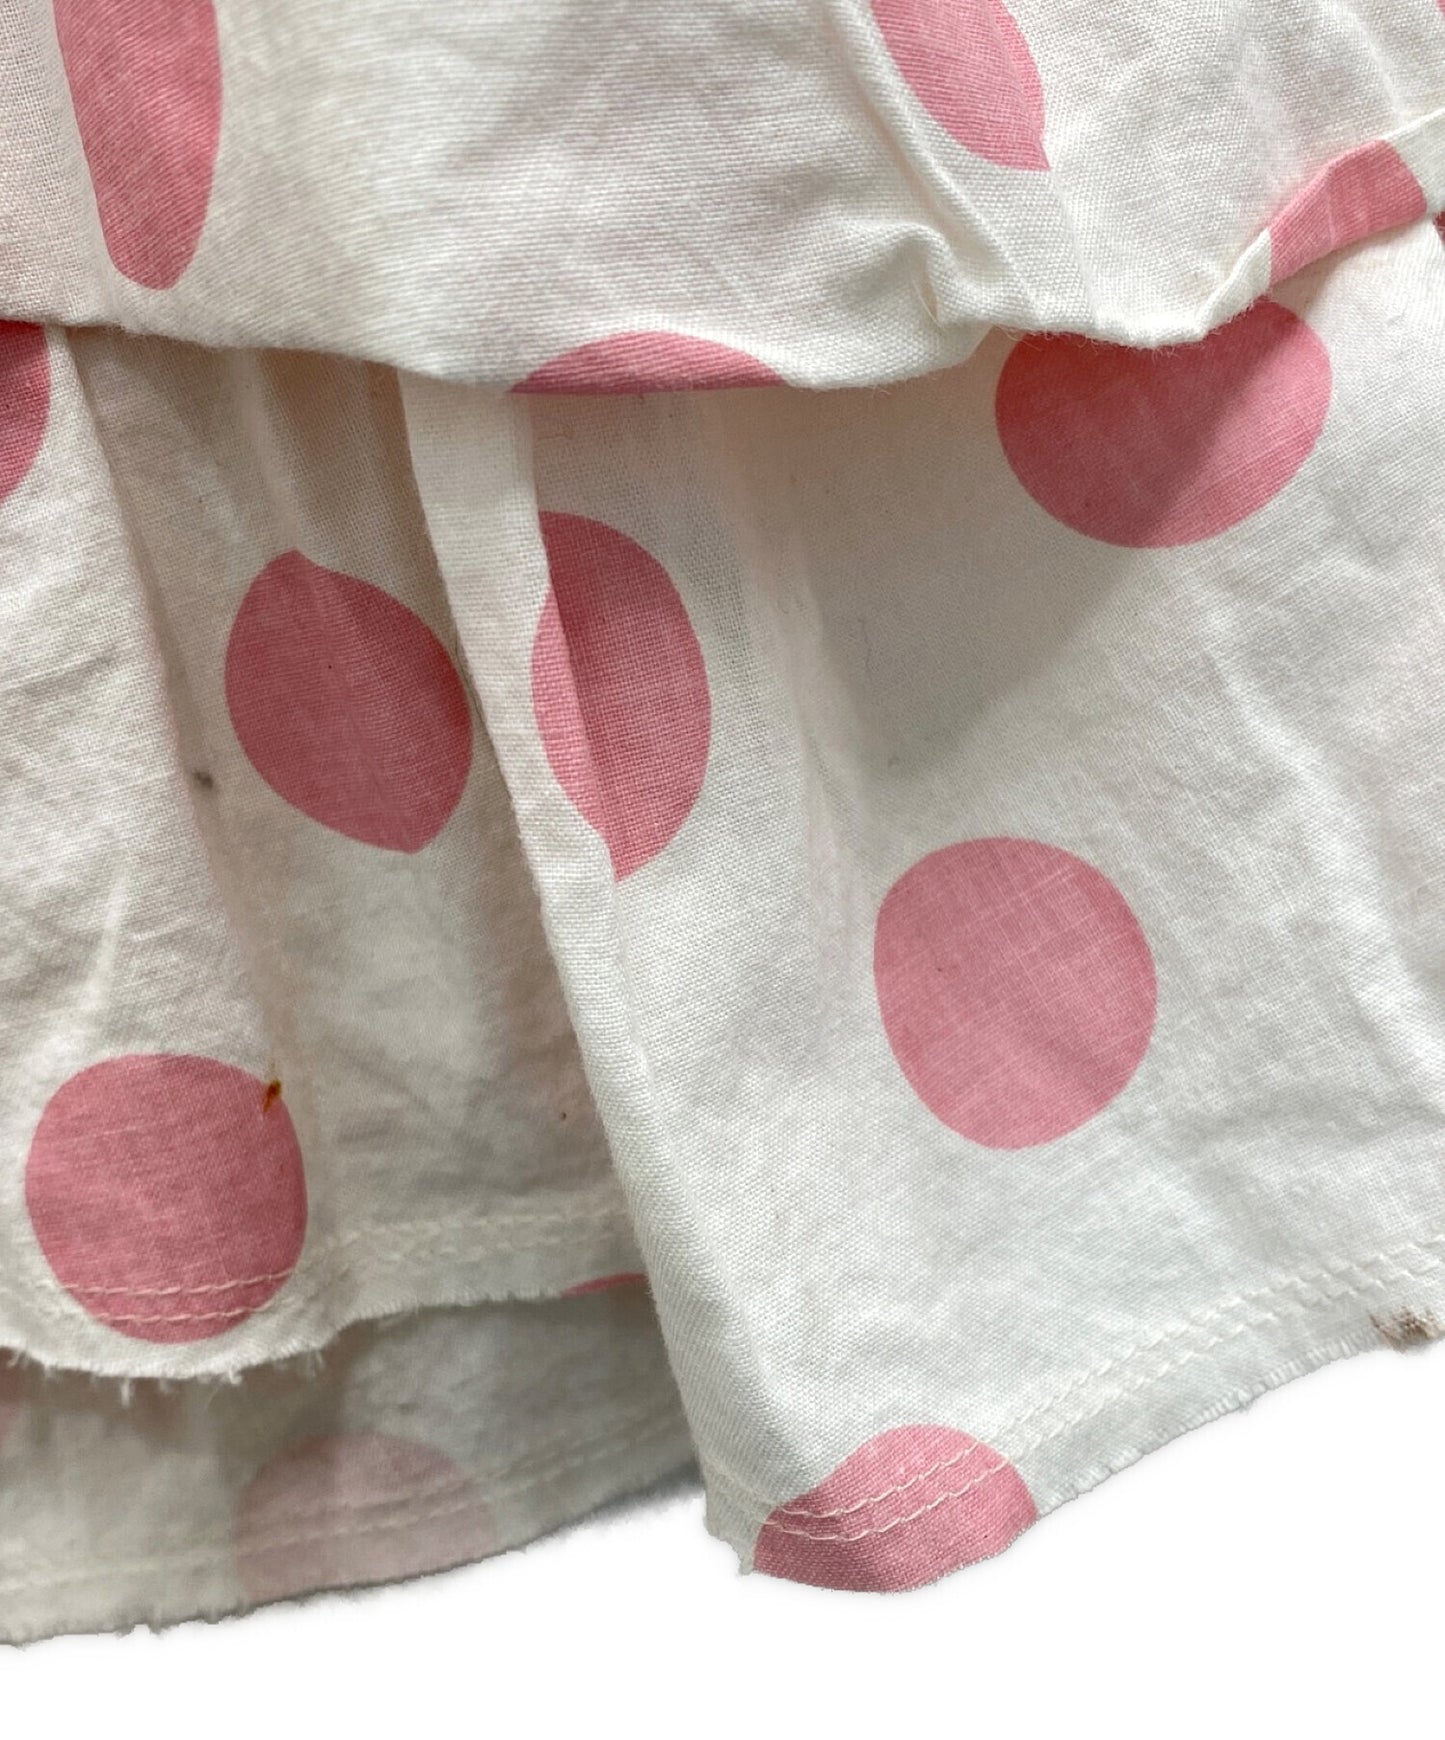 [Pre-owned] tricot COMME des GARCONS dot skirt TS-S036